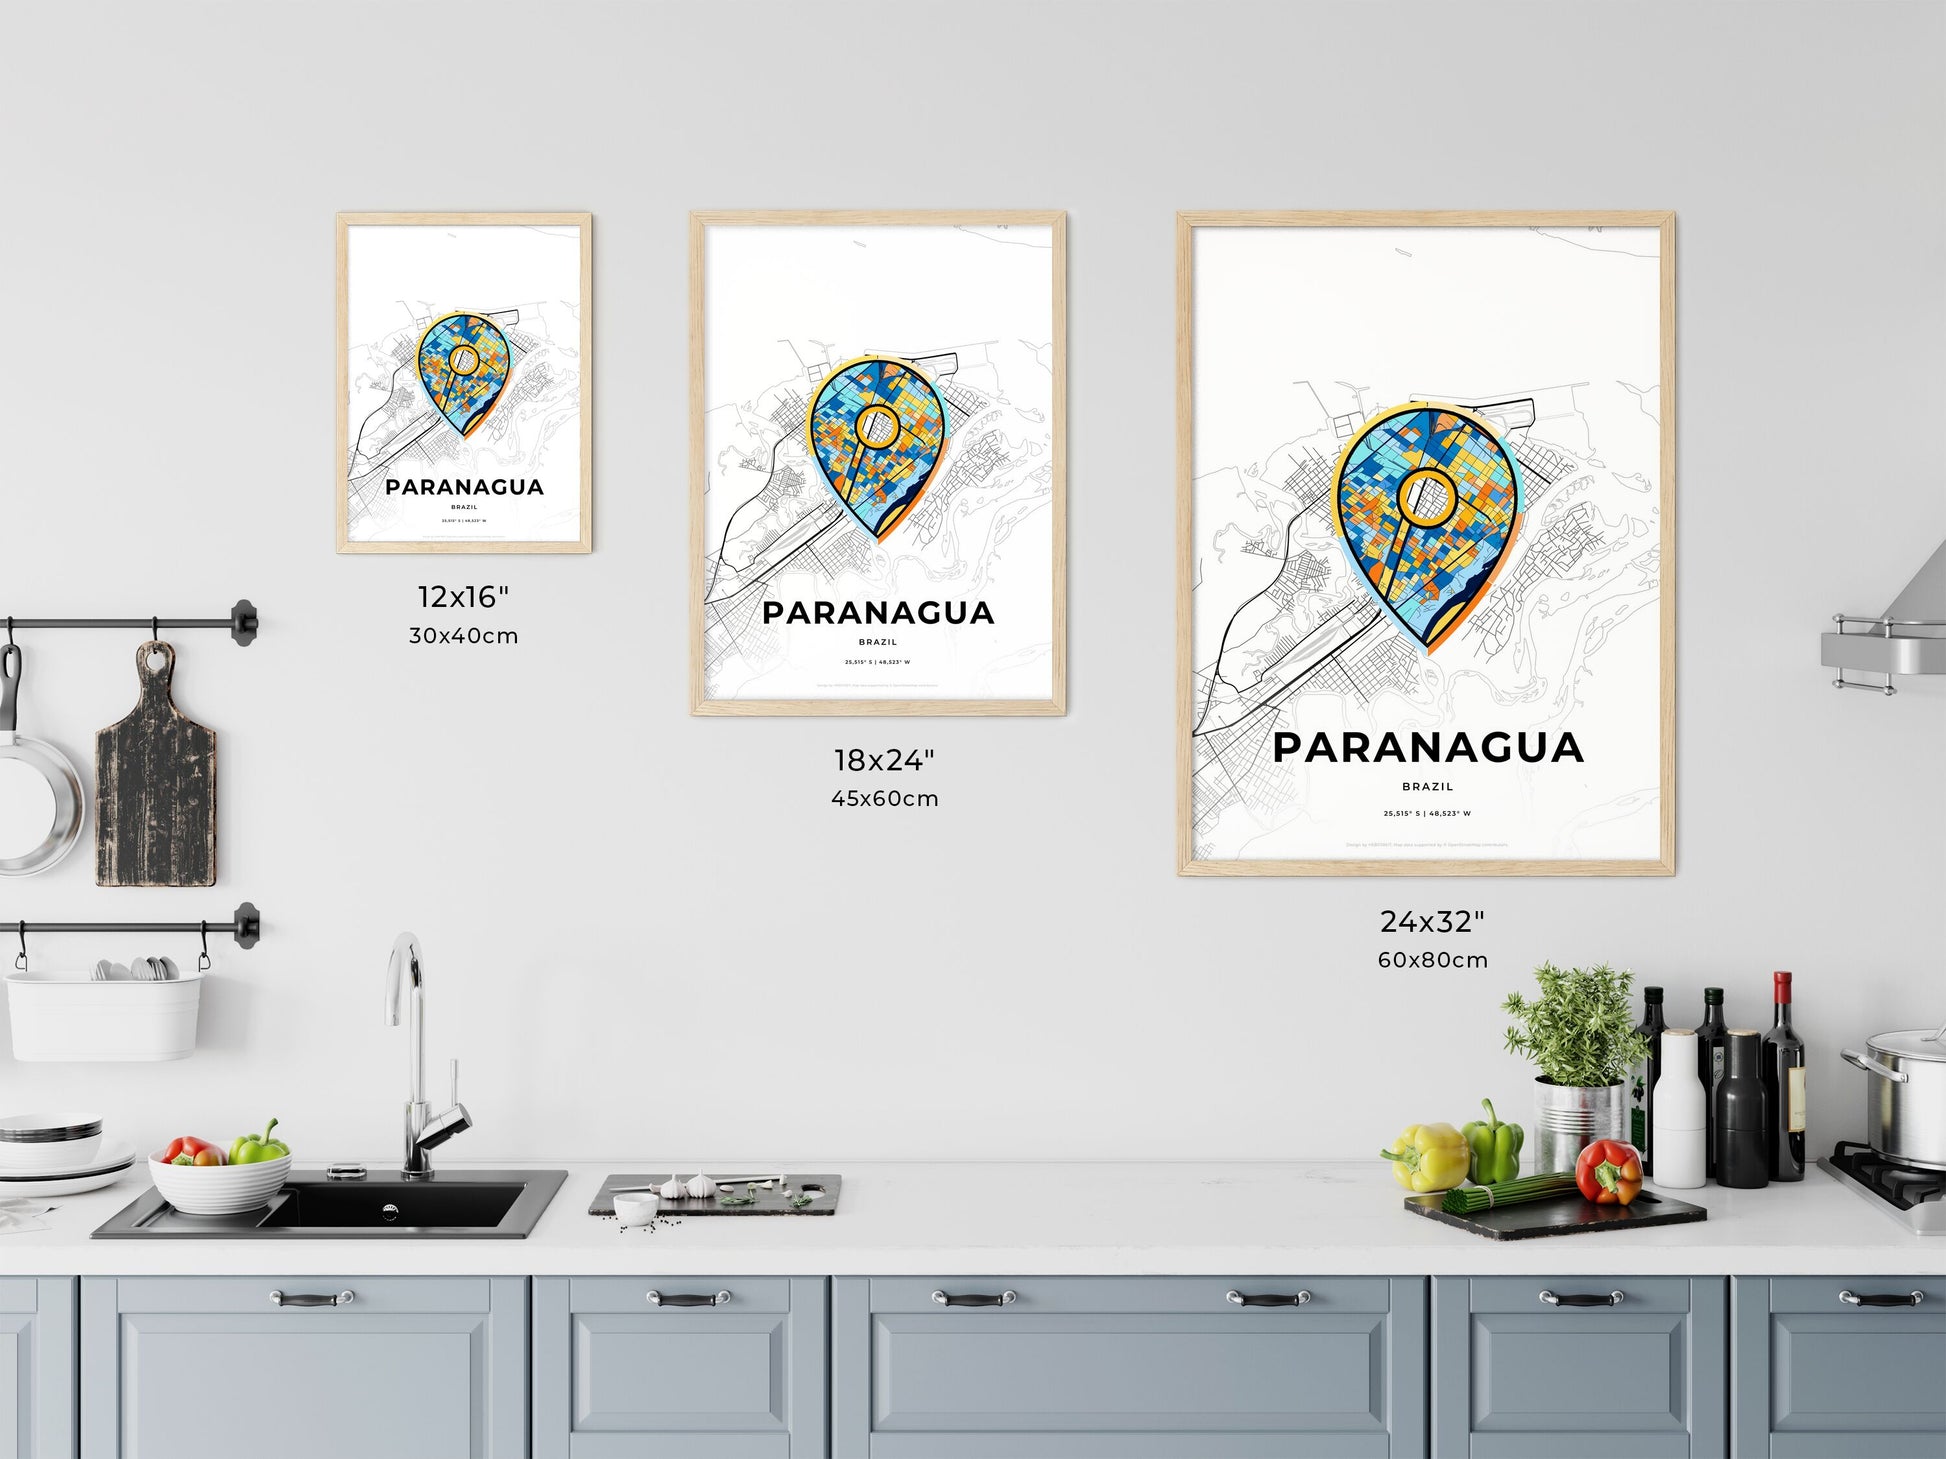 PARANAGUA BRAZIL minimal art map with a colorful icon.